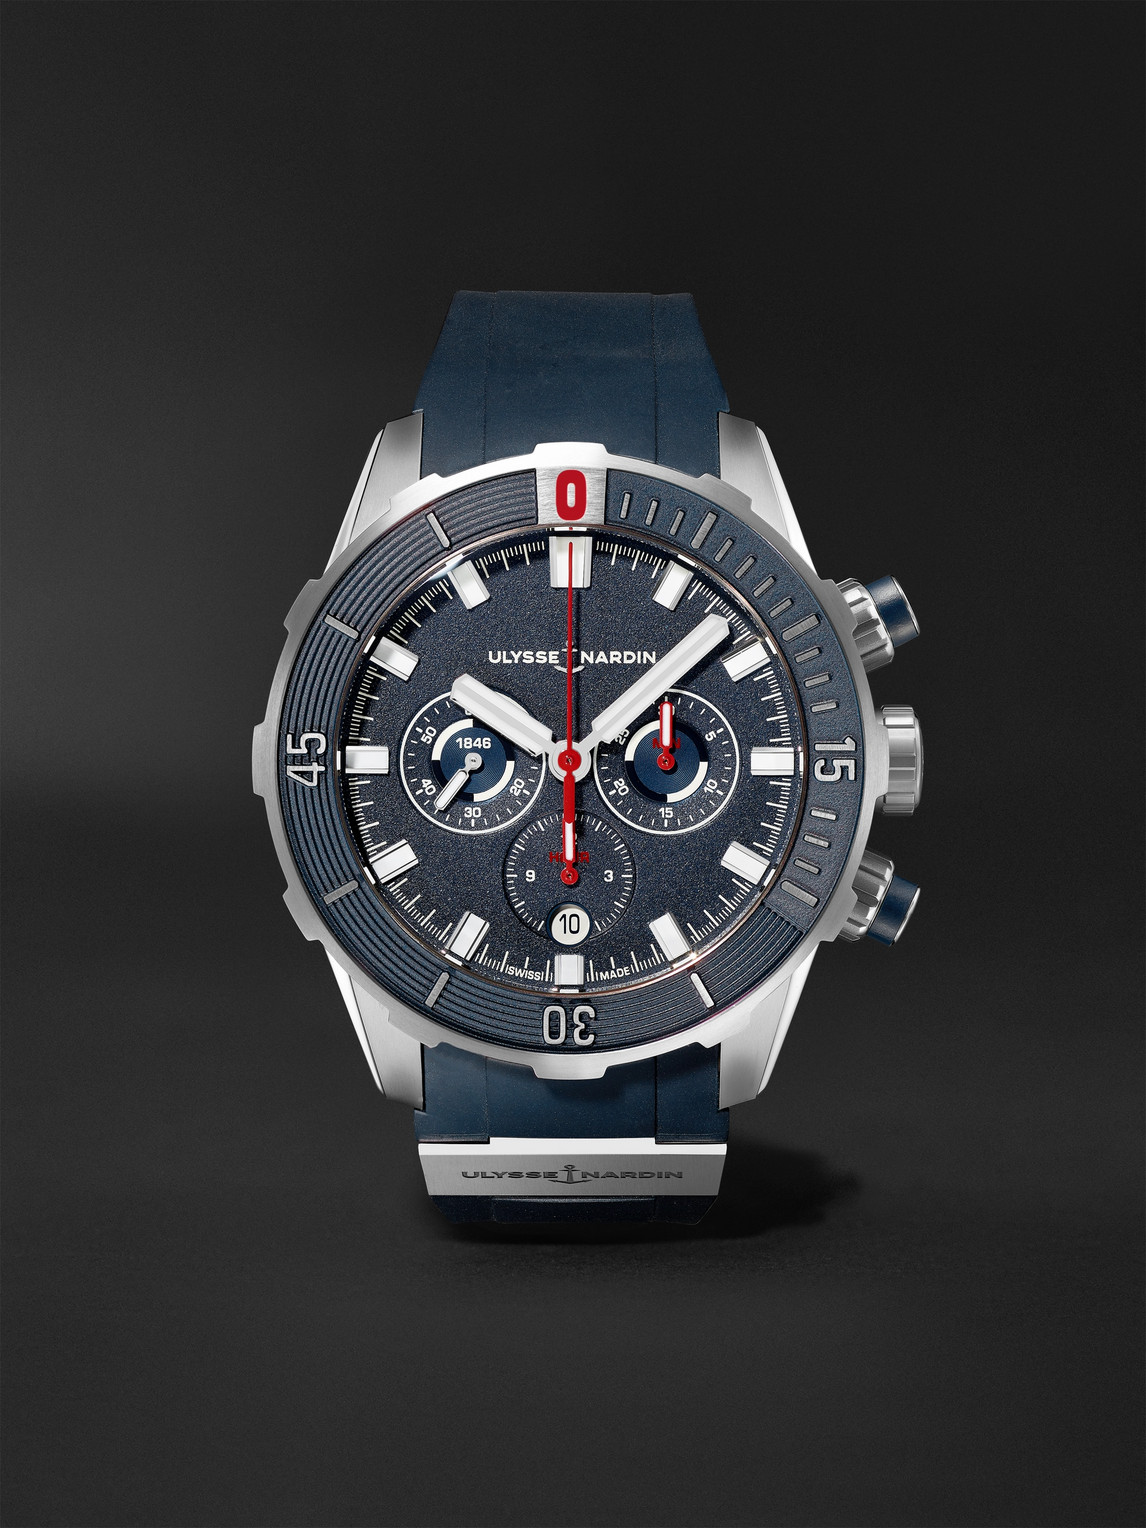 Ulysse Nardin Diver Automatic Chronograph 44mm Titanium And Rubber Watch, Ref. No. 1503-170-3/93 In Blue